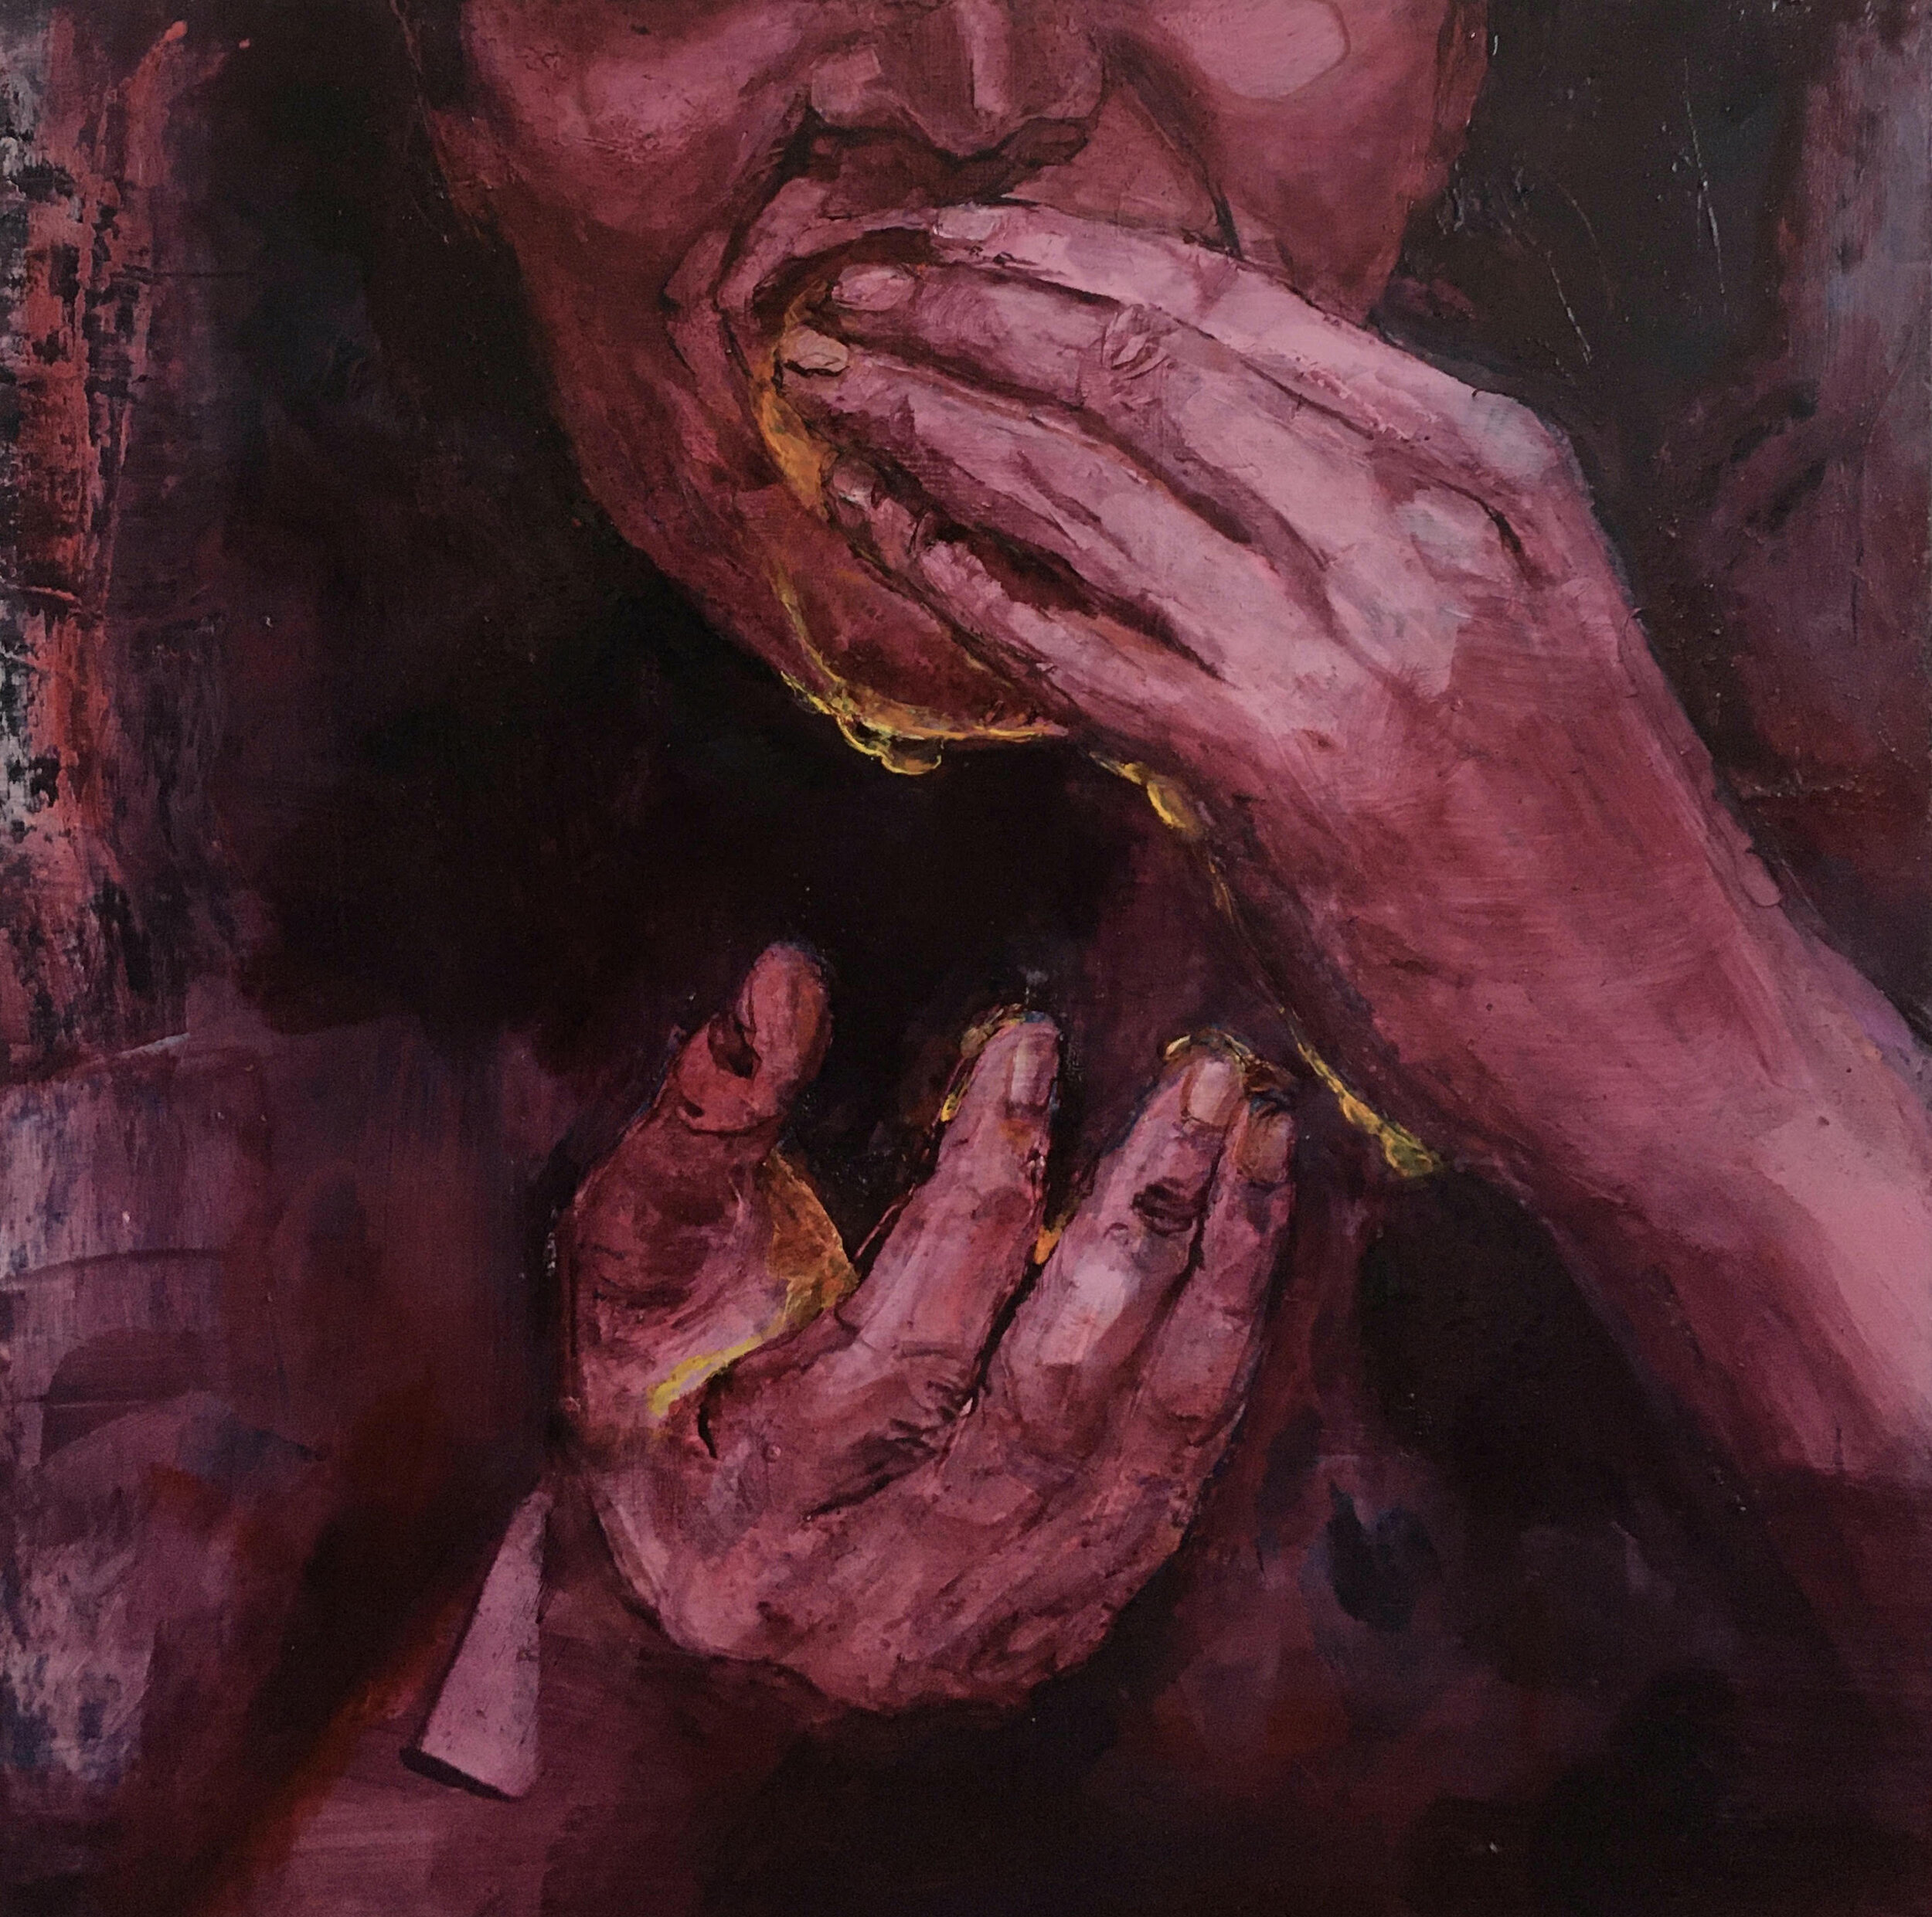 Bite II (2021) Oil, Acryllic, Pastel and Colored Pencil on Panel, 14"x14"